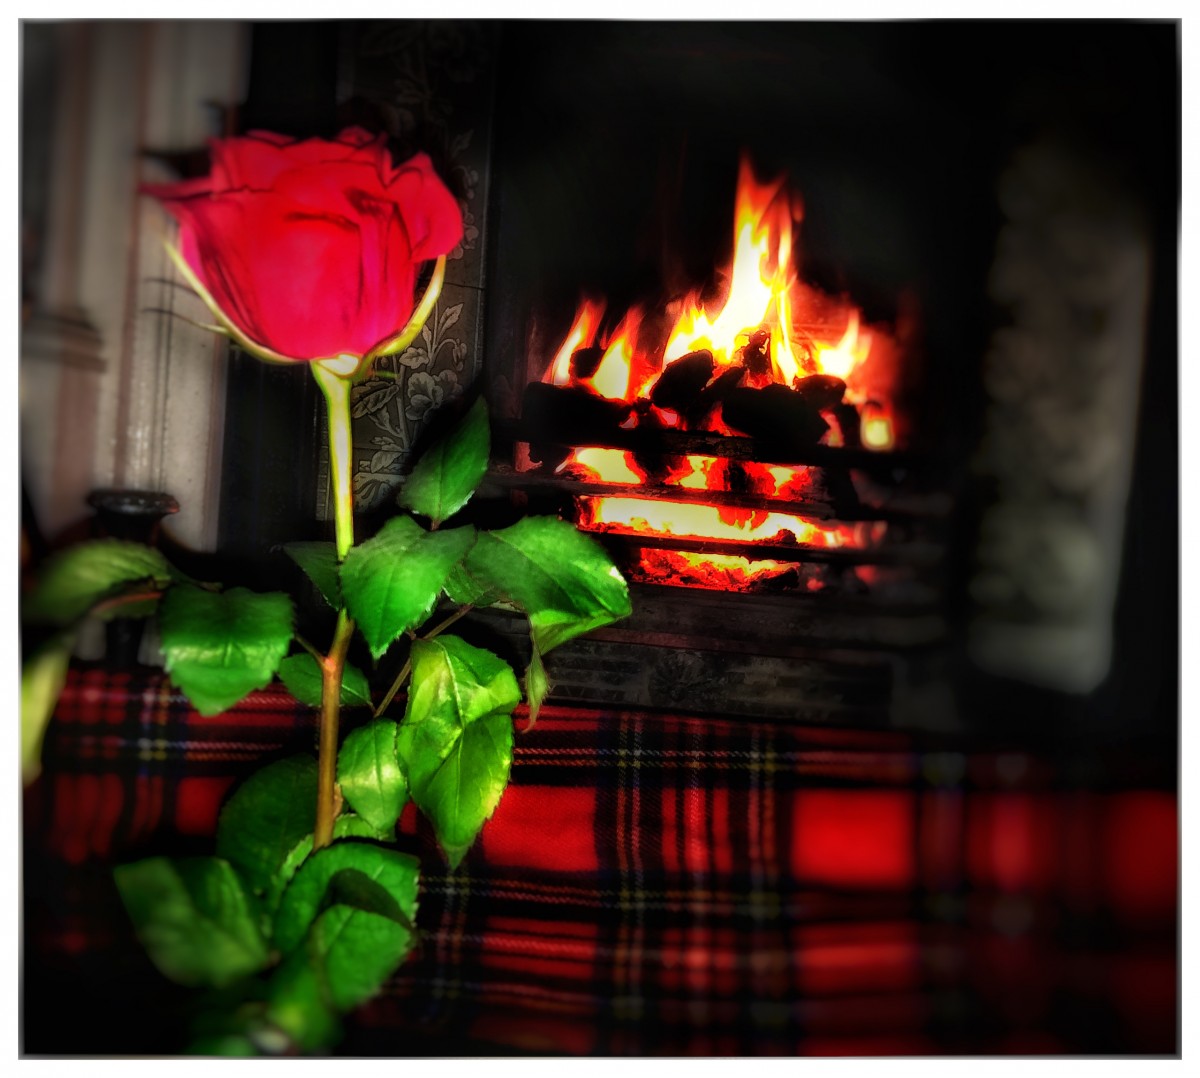 Derek Browning sent us this stunning image for Rabbie Burn's Famous poem ' A Red, Red Rose'